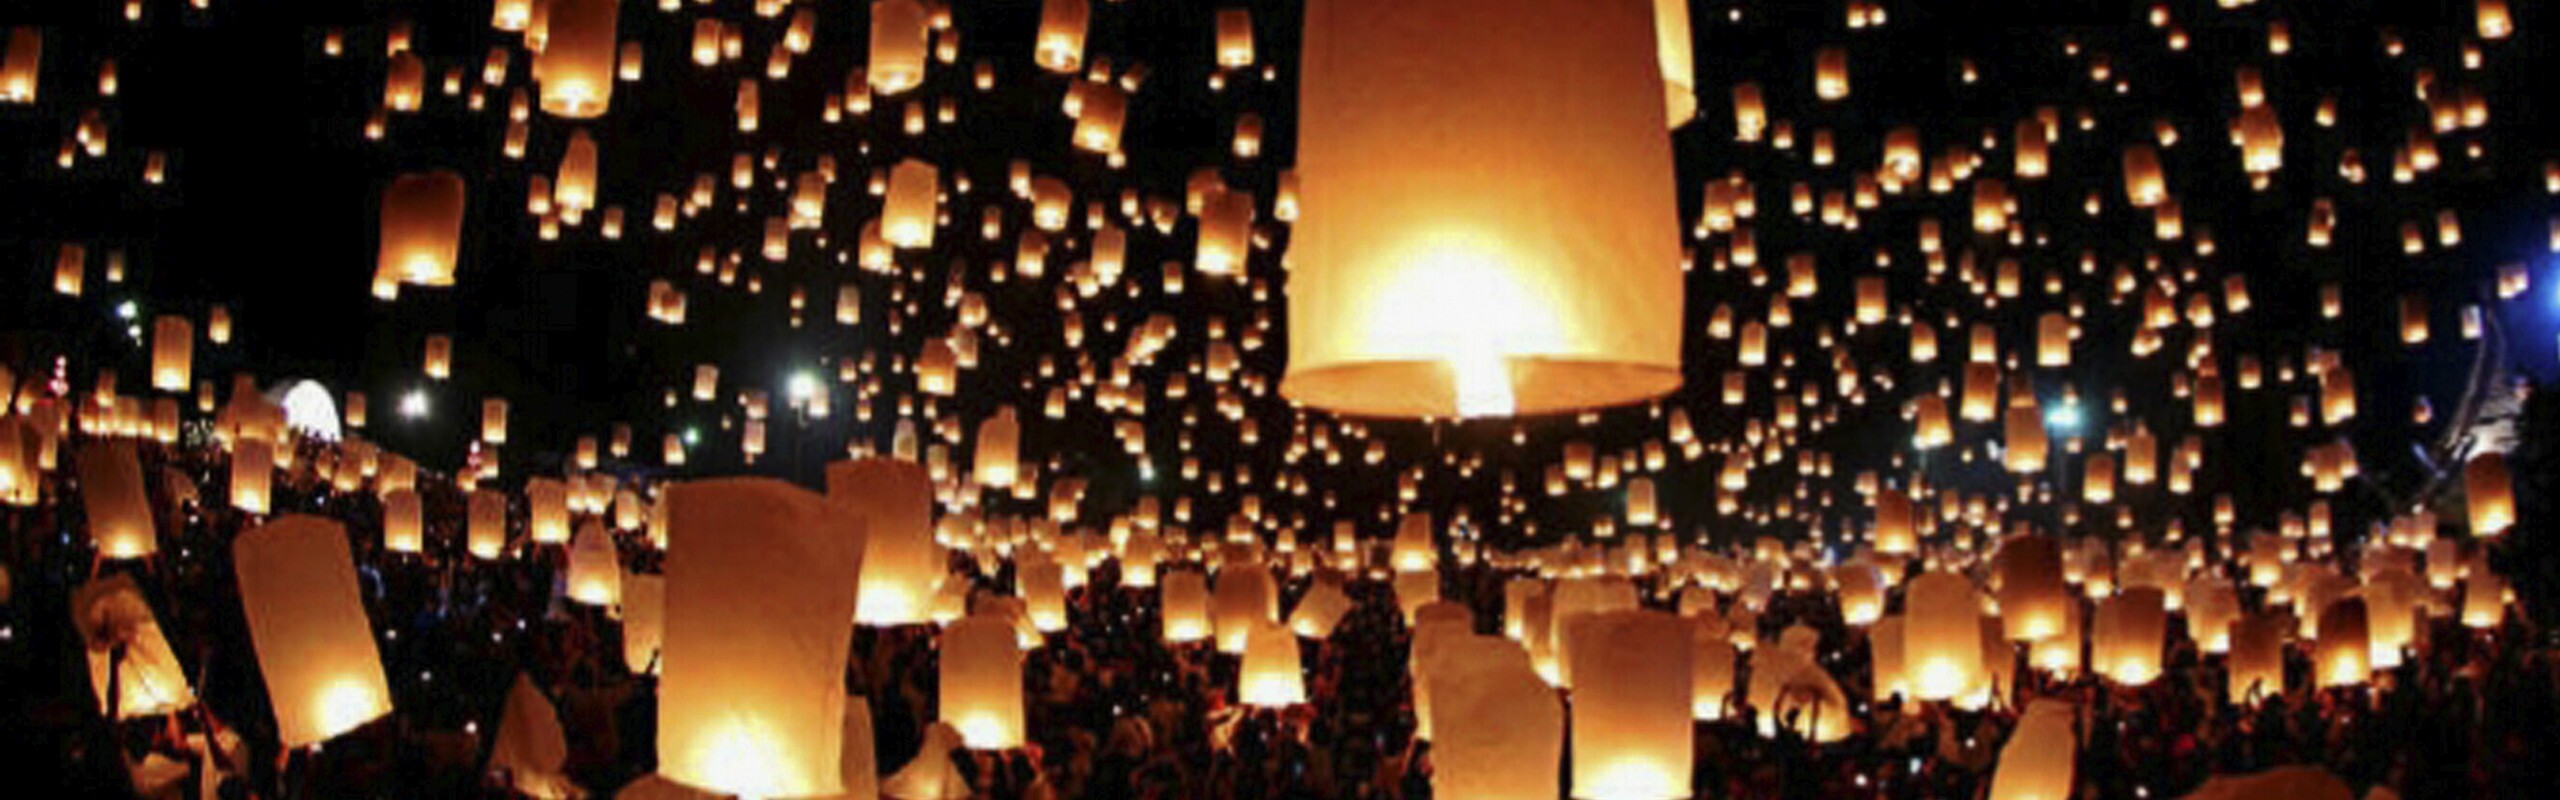 How to Celebrate the Thai Lantern Festival Responsibly, Loy Krathong & Yee Peng in Thailand